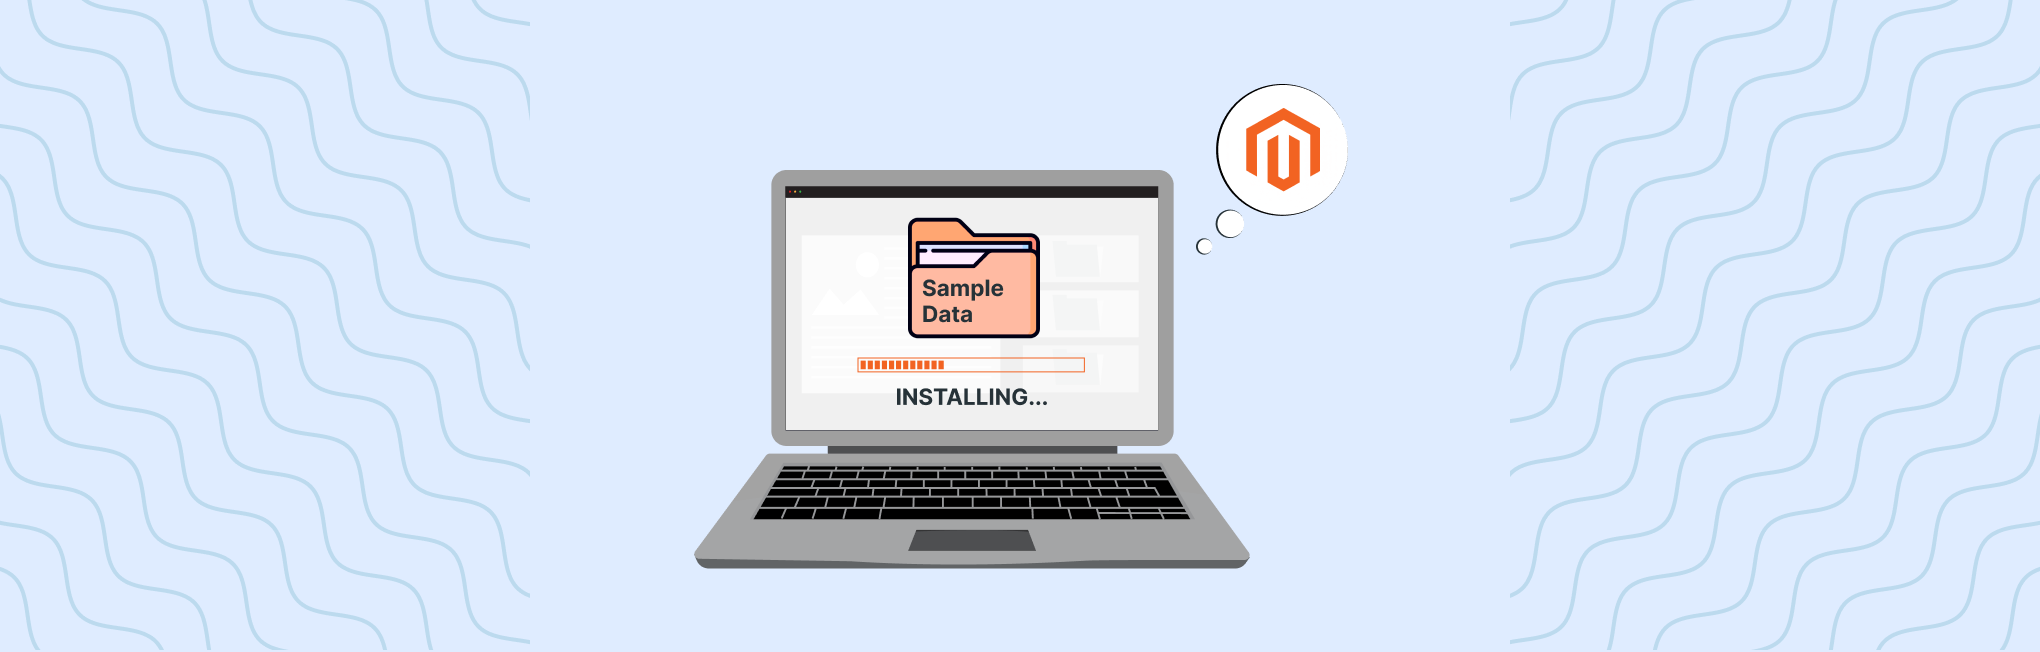 3 Methods to Install Sample Data in Magento 2